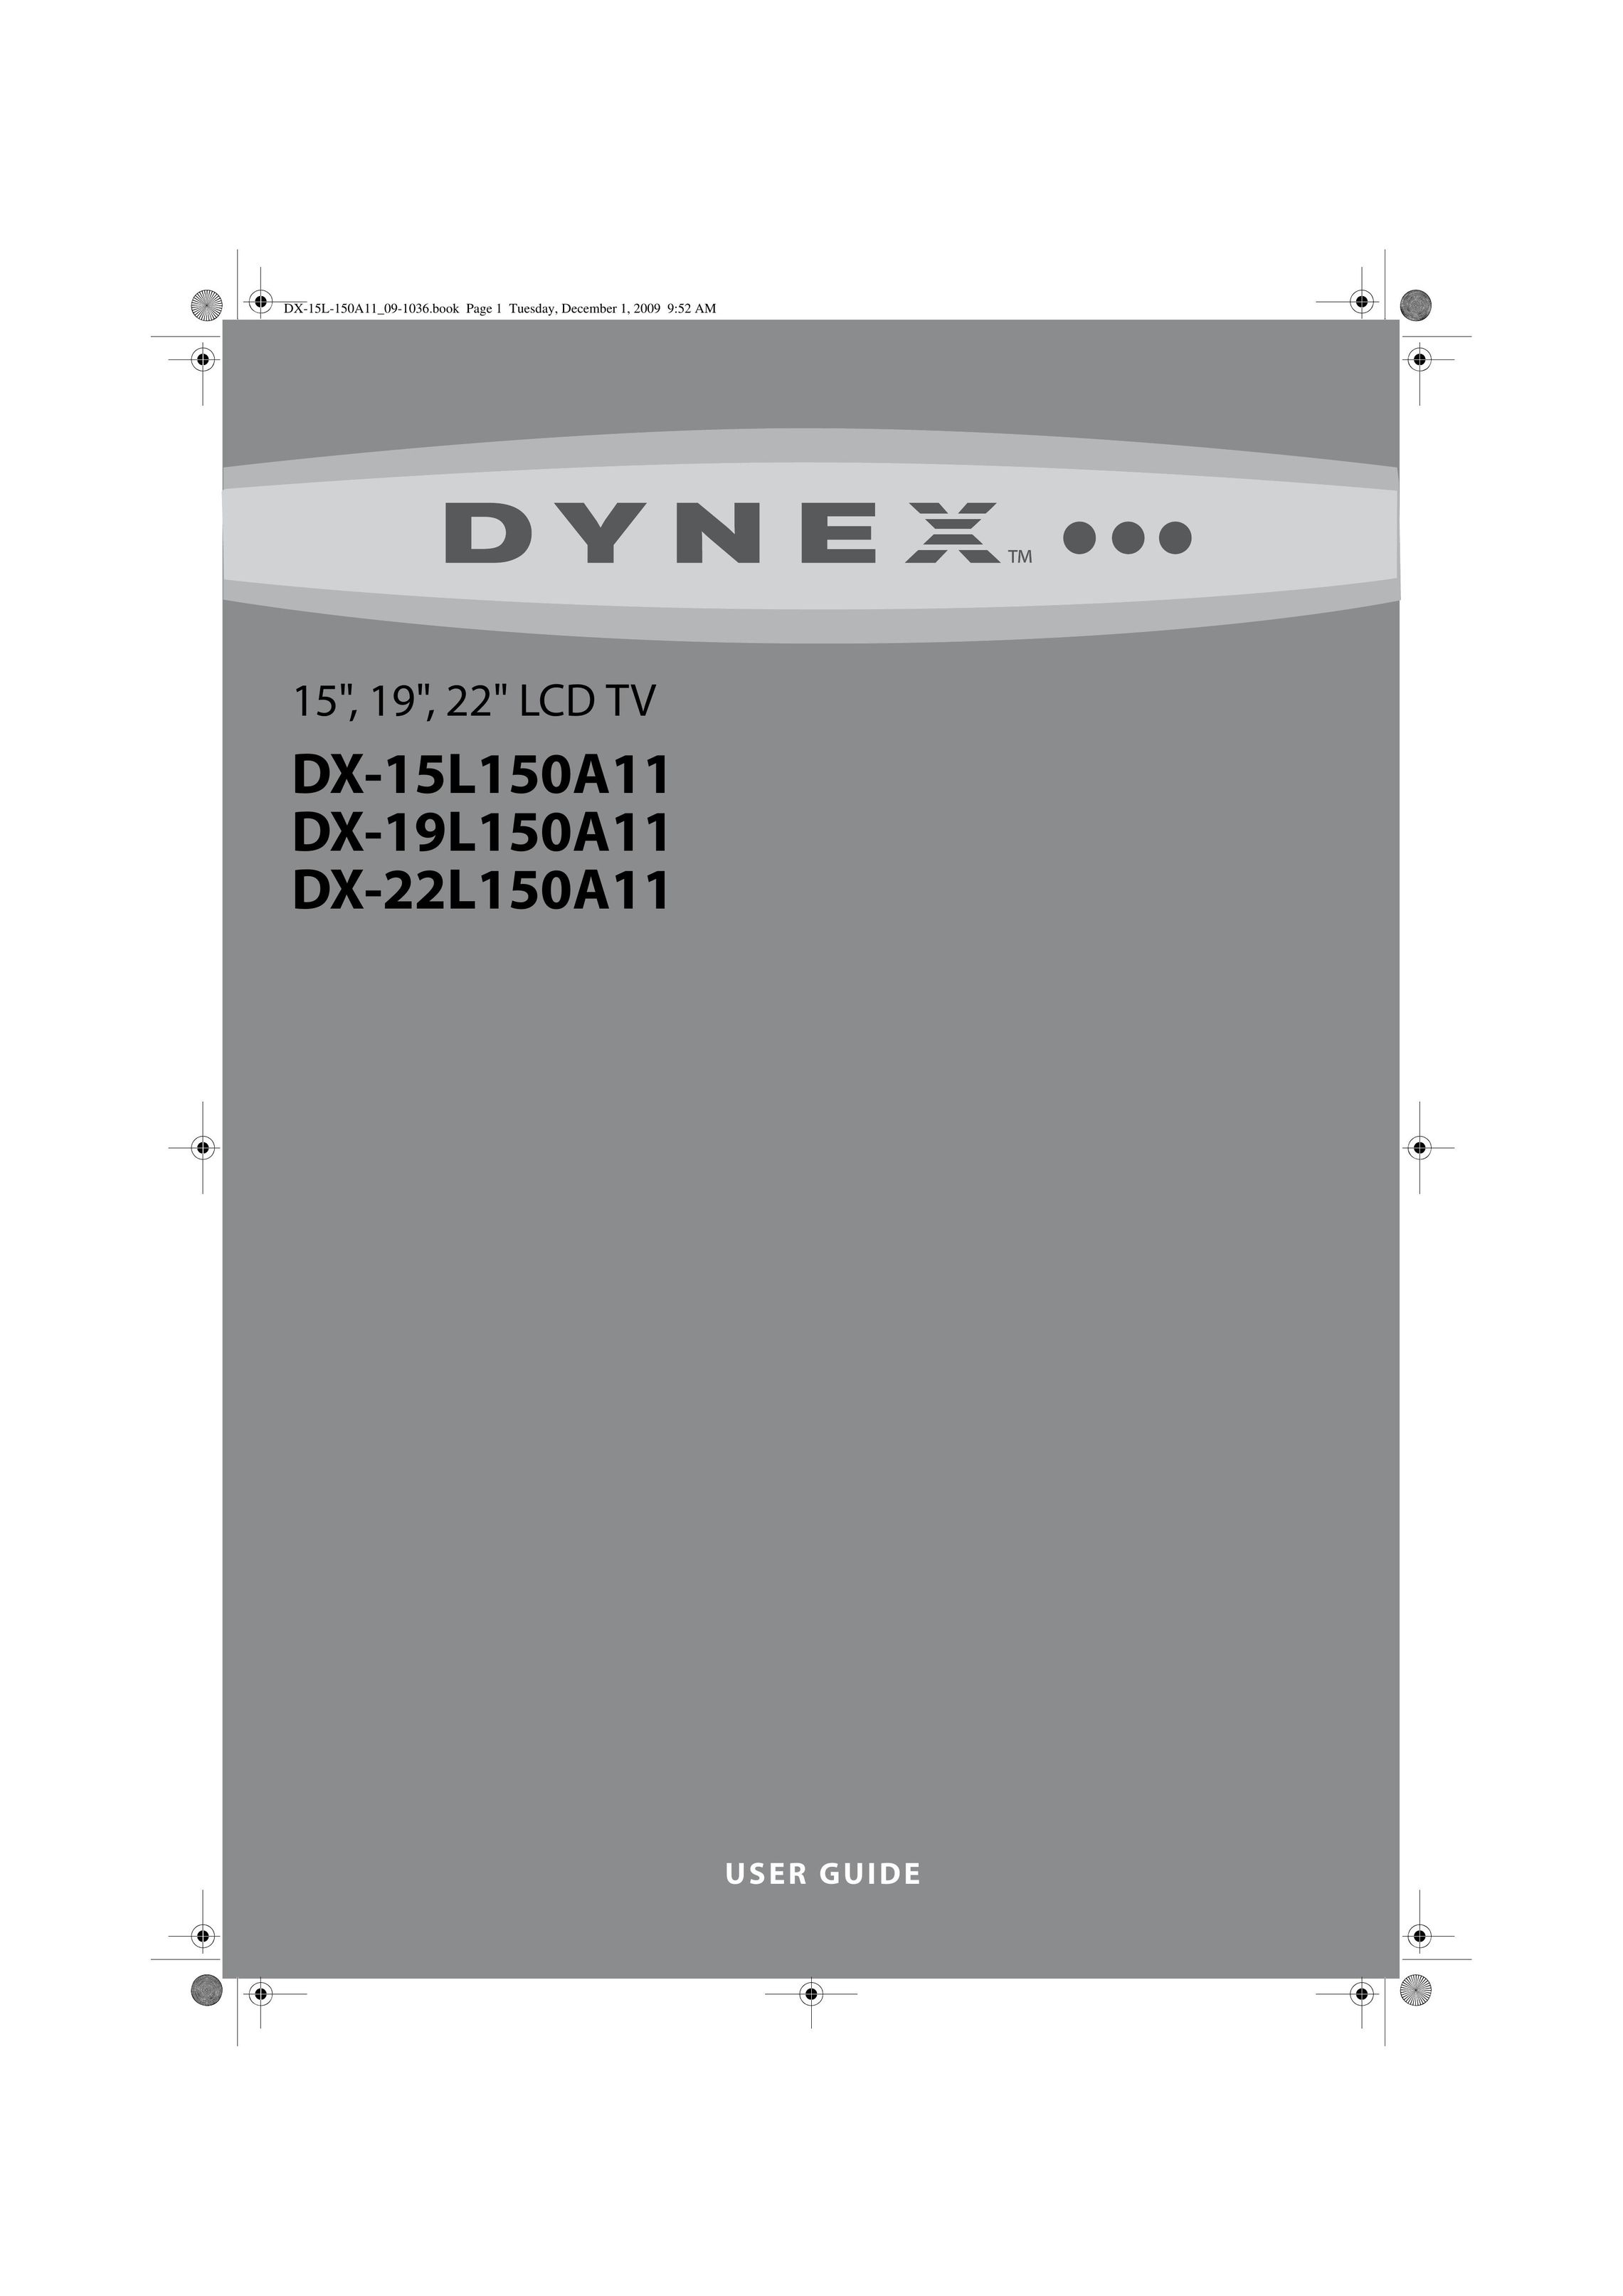 Dynex DX-22L150A11 Flat Panel Television User Manual (Page 1)